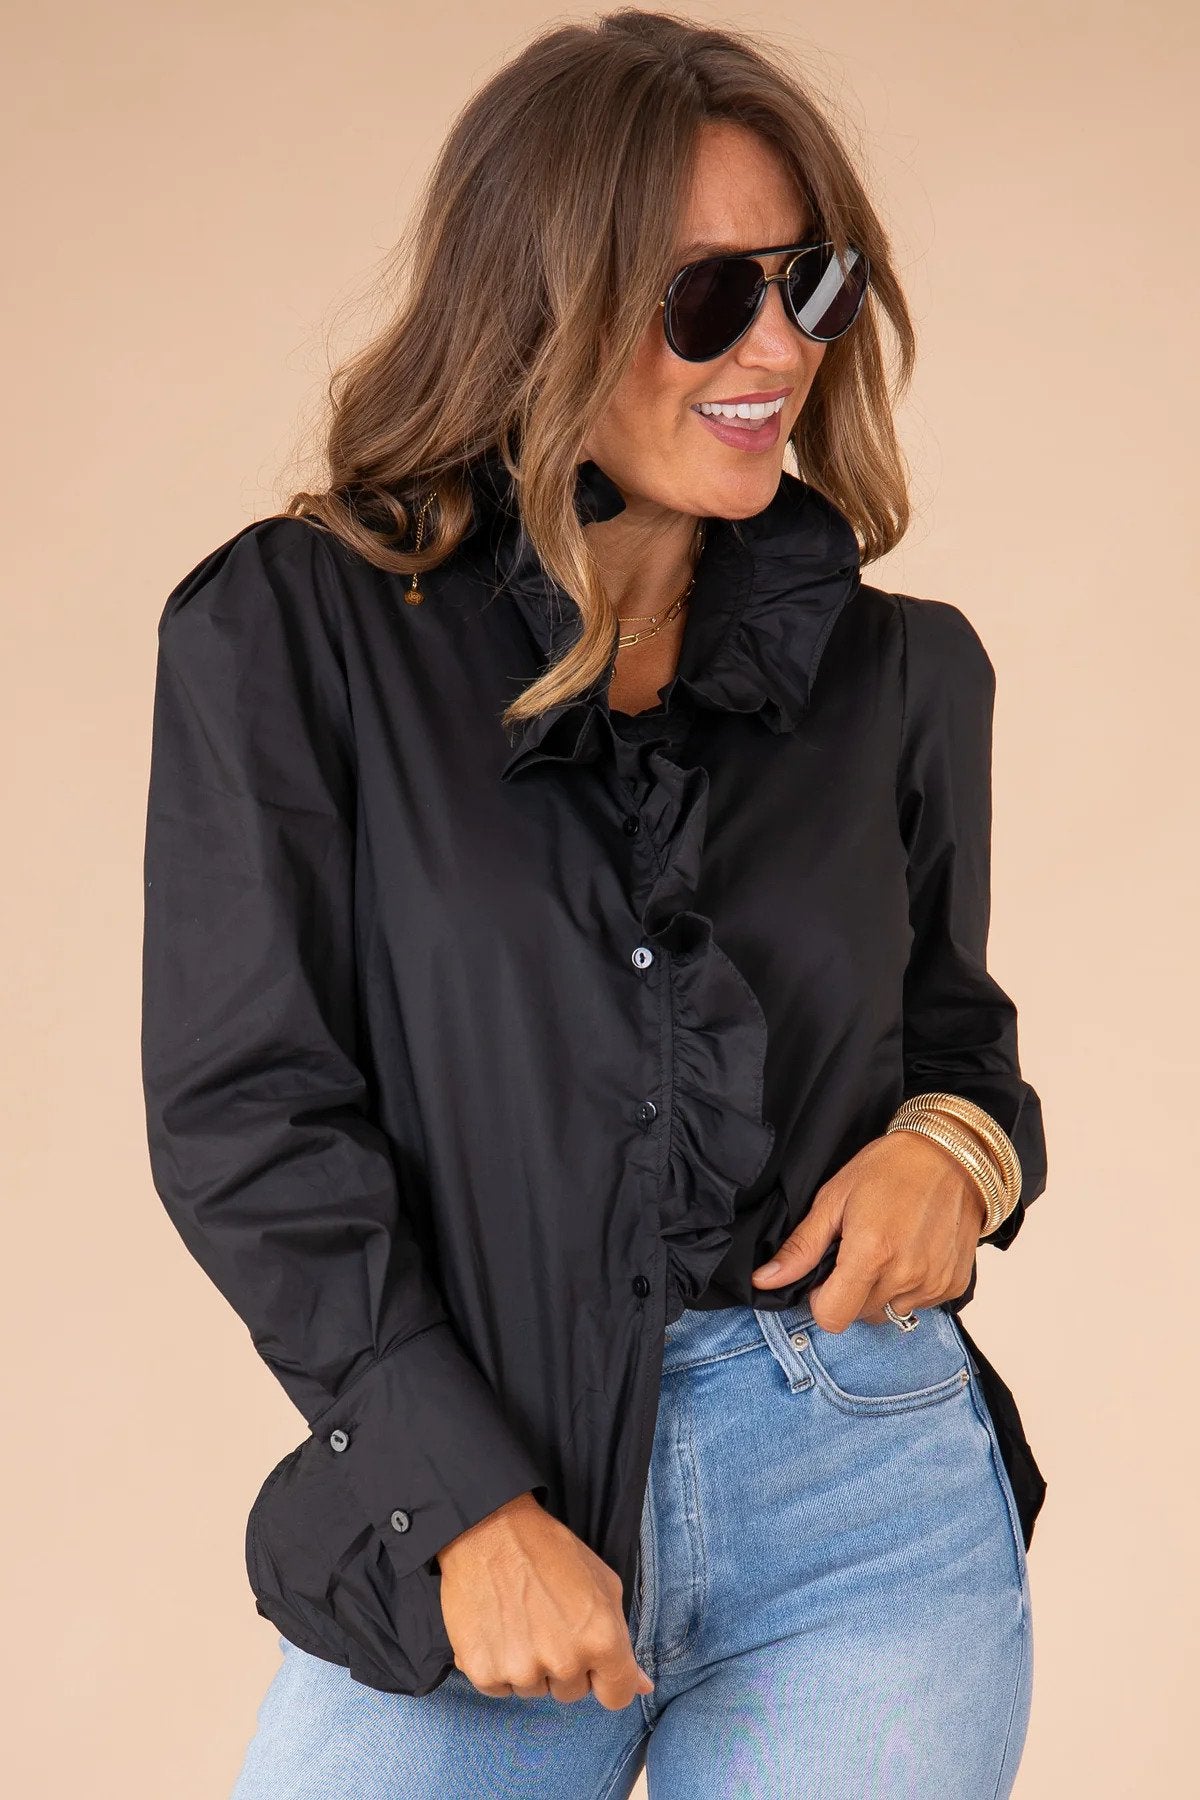 A woman wearing a black blouse with jeans